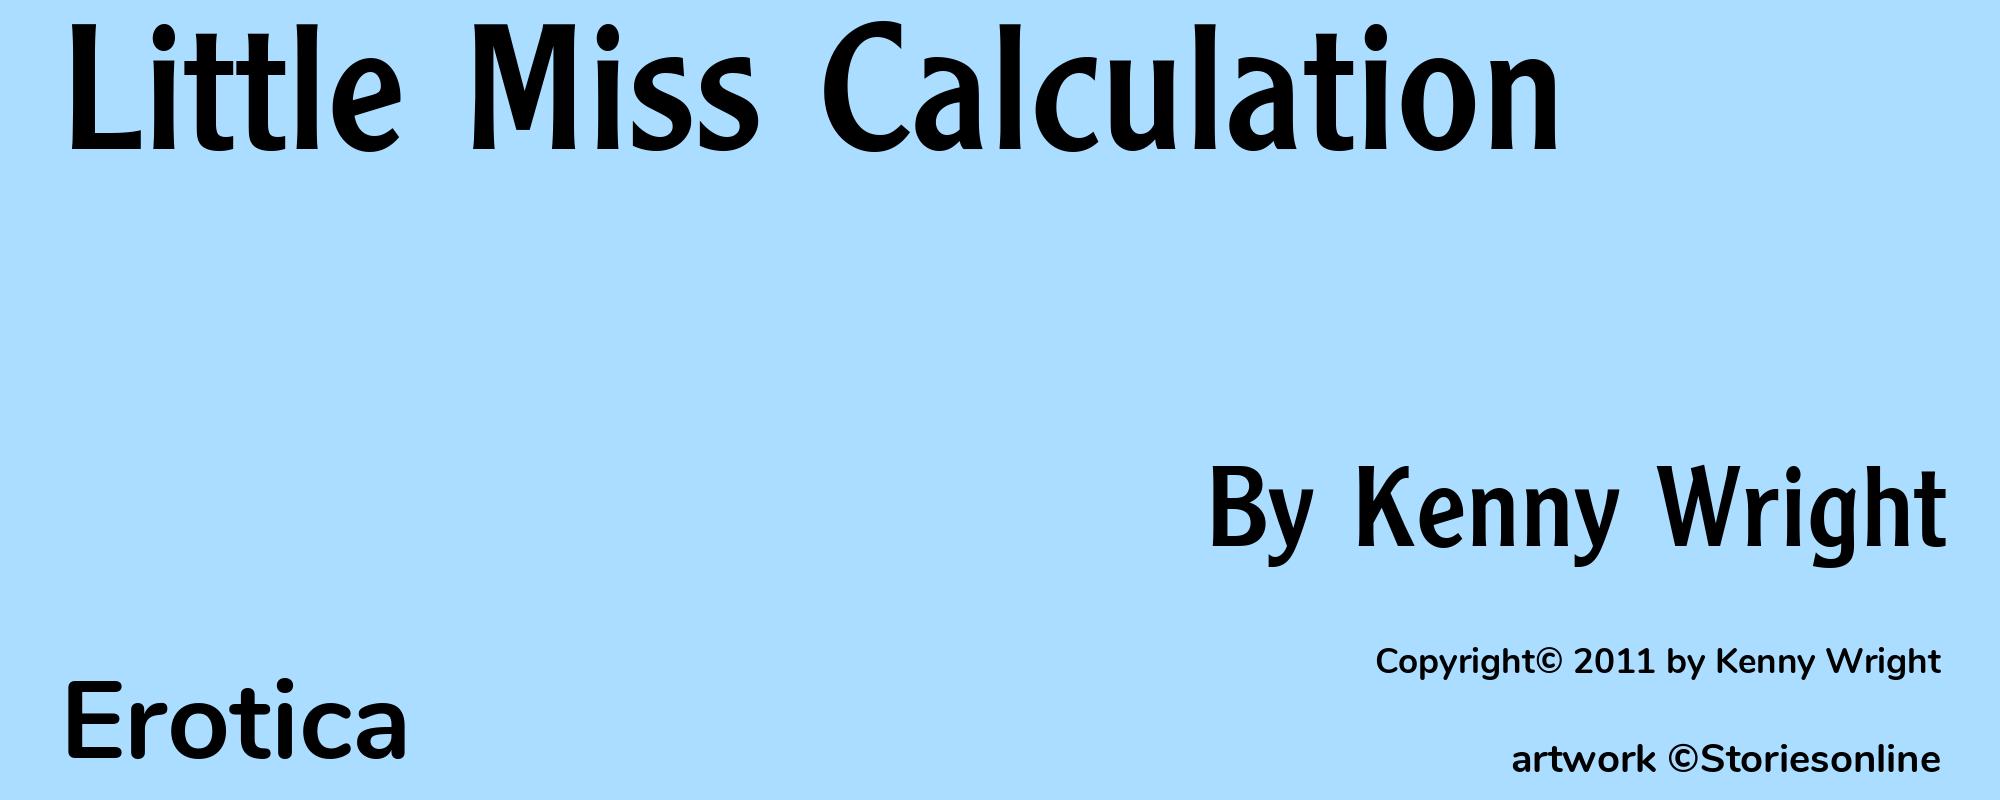 Little Miss Calculation - Cover